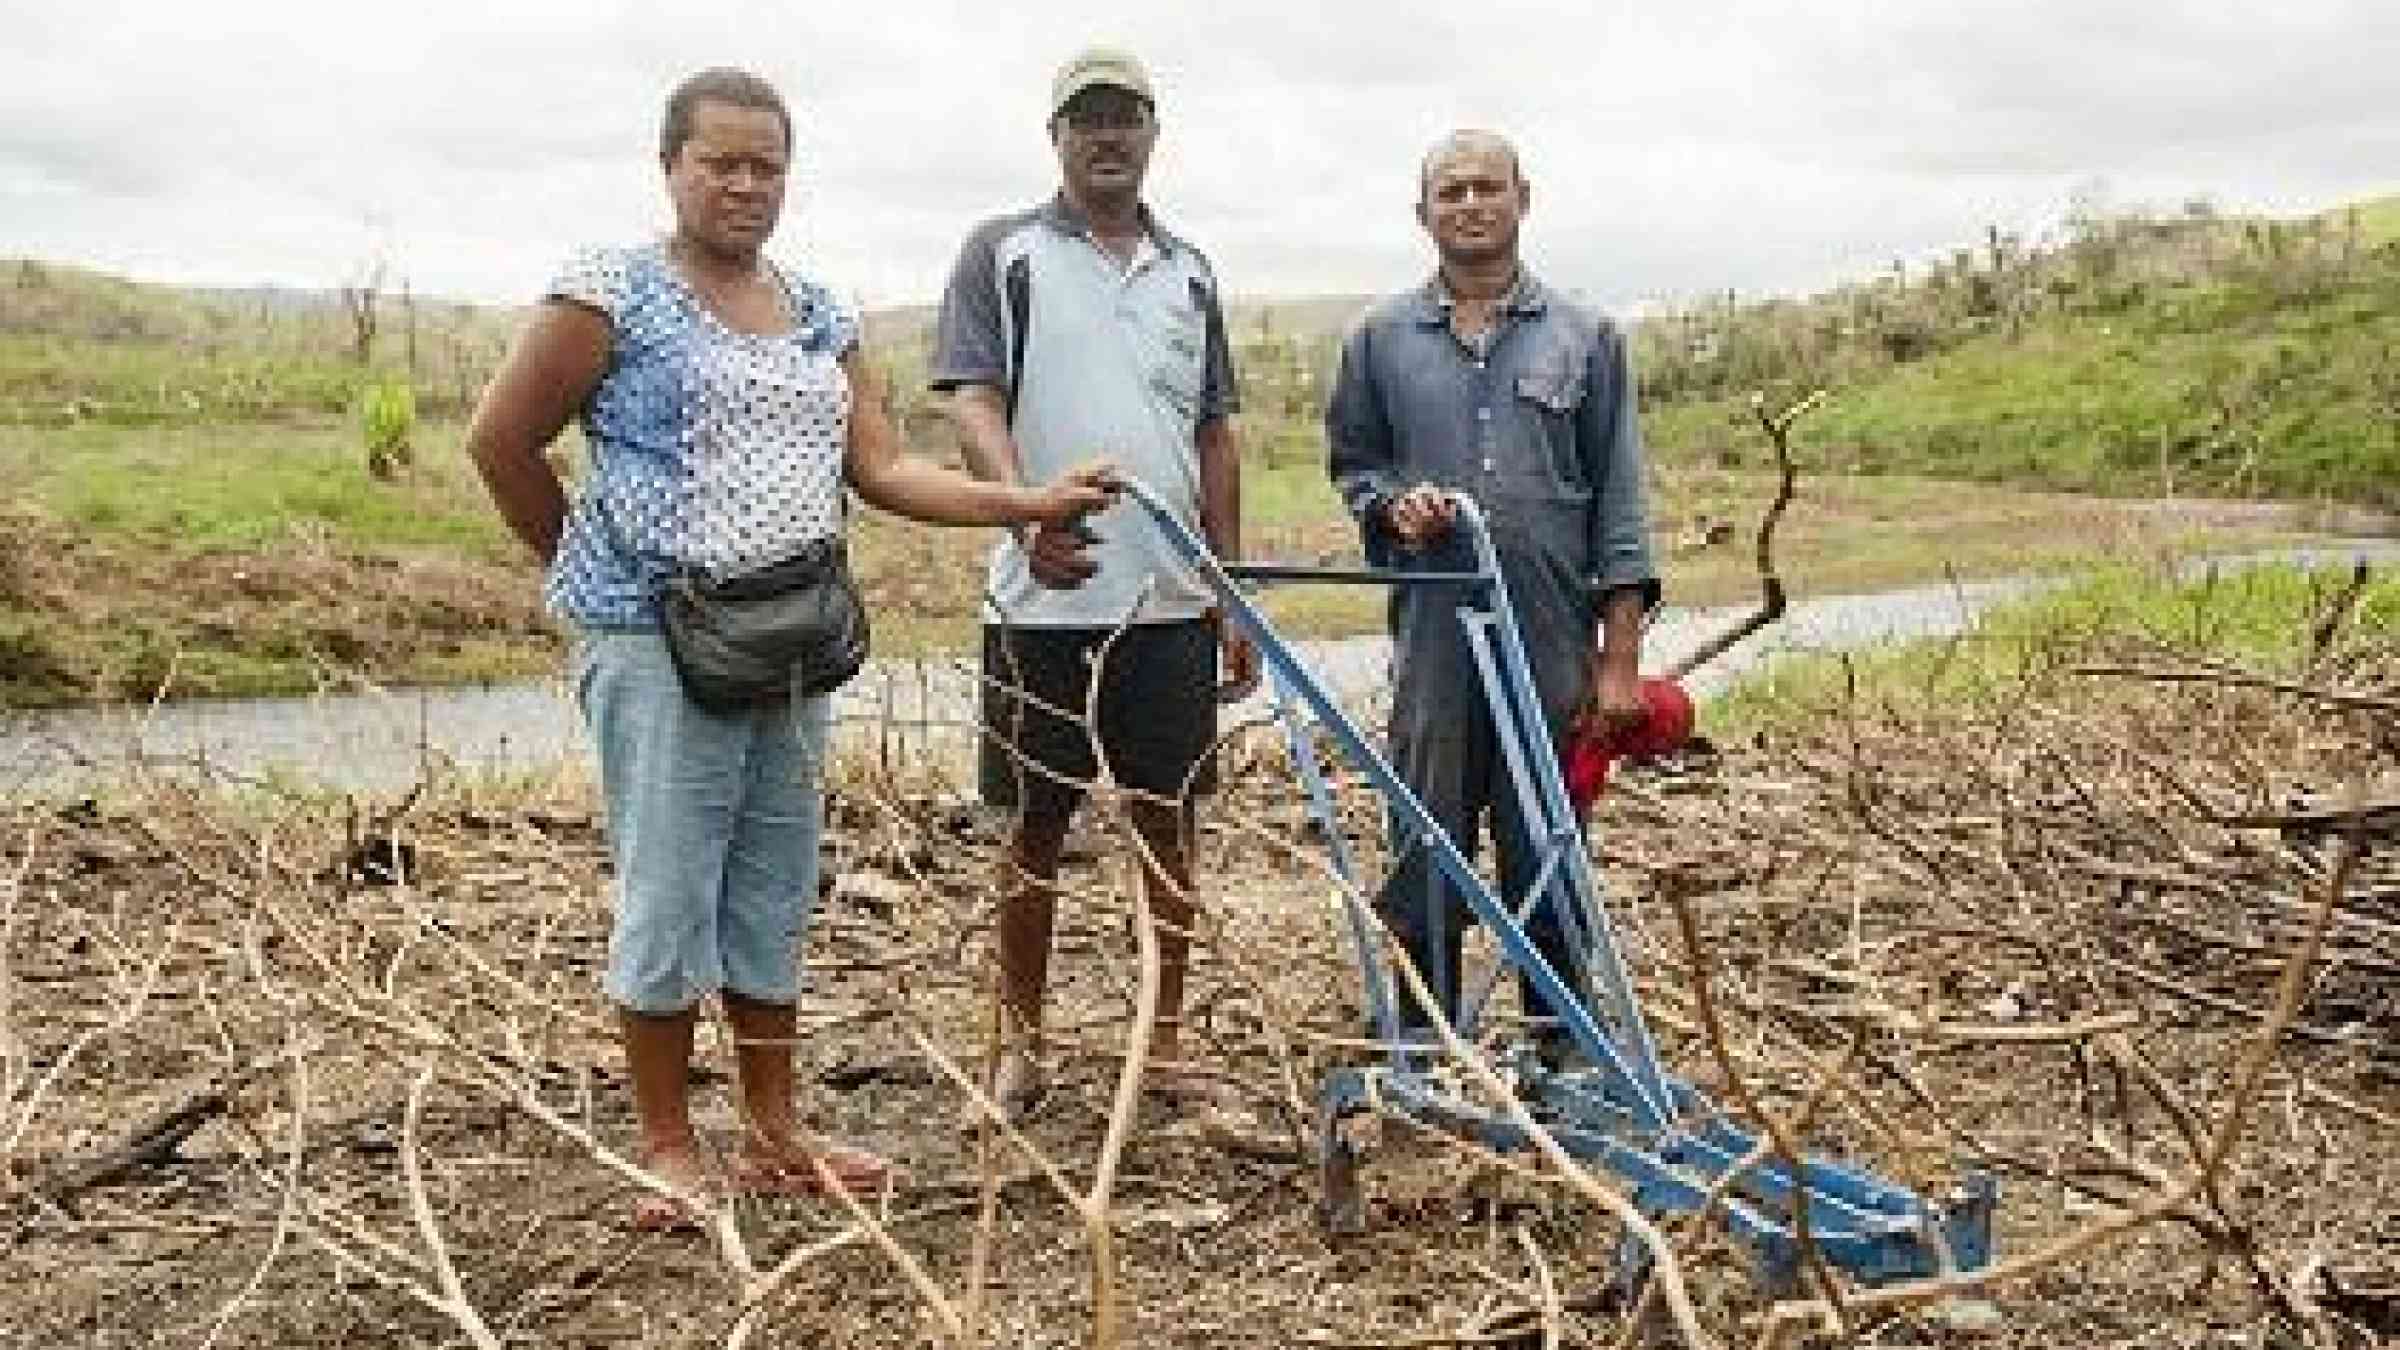 Cyclone Winston wiped out the eggplant, chilli, cow pea and spinach crop of these three farmers. Fiji’s new DRR Policy seeks to strengthen agricultural livelihoods. (Photo: UN Women)